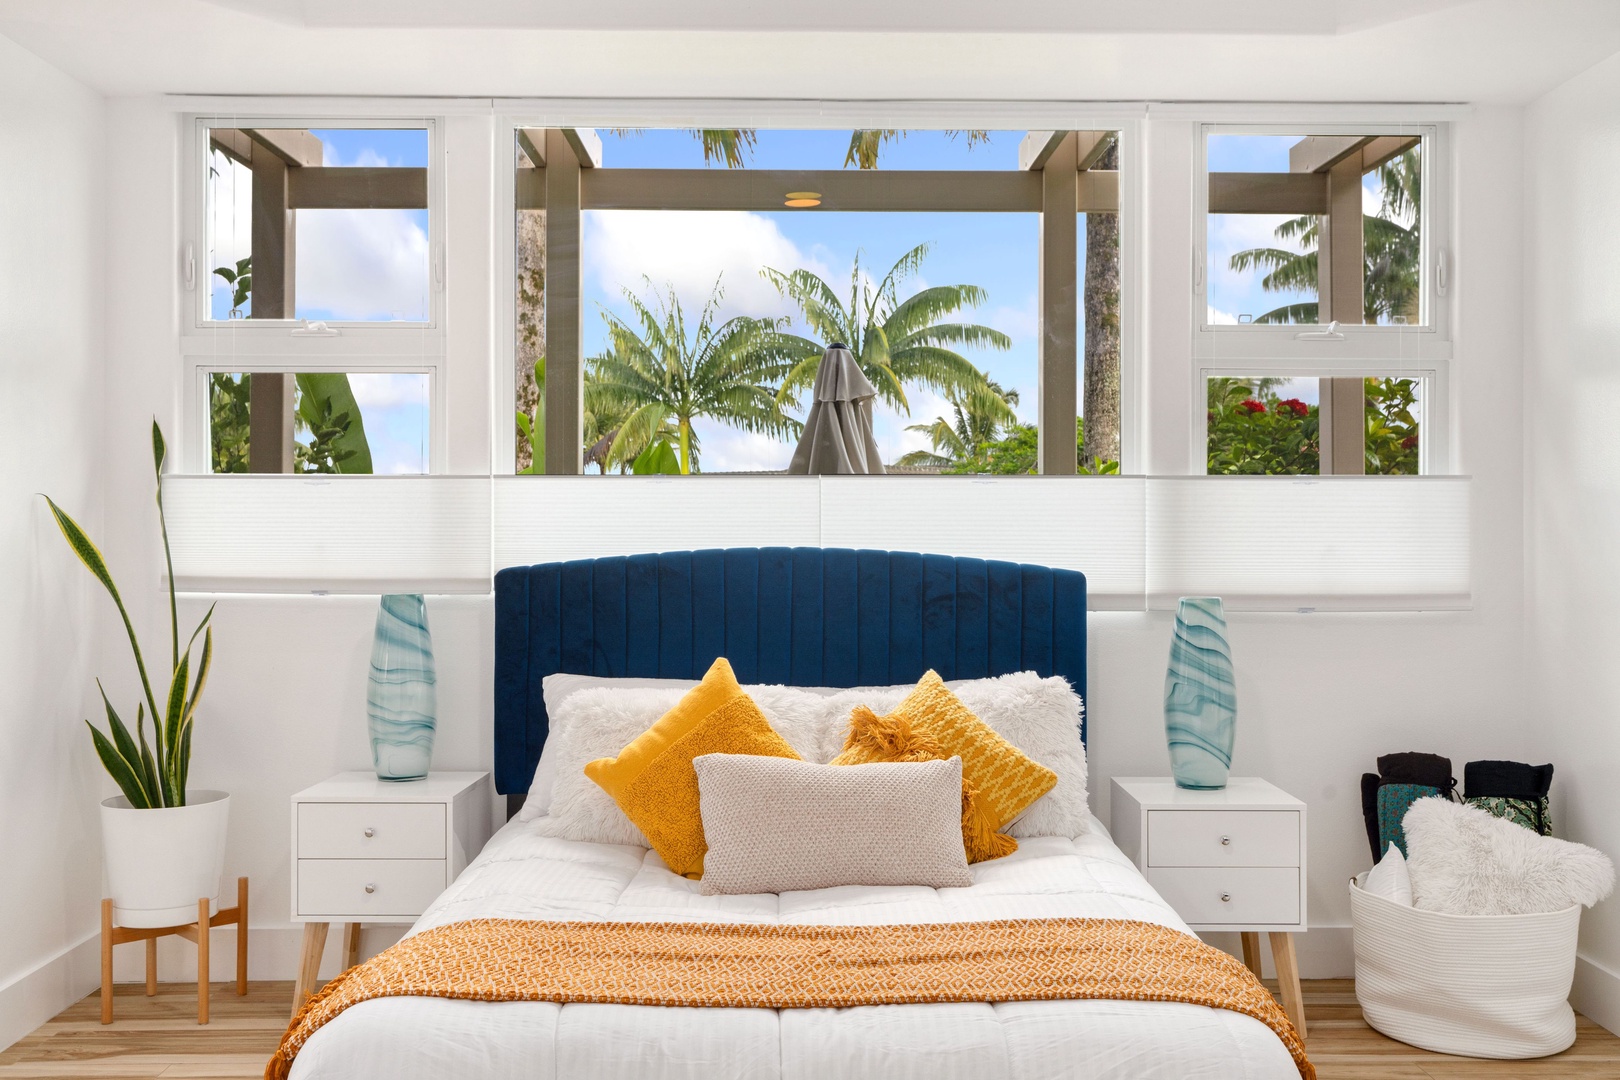 Princeville Vacation Rentals, Tropical Elegance - Flanked by symmetrical doorways, the room opens up to a captivating view of palm trees through a central window.